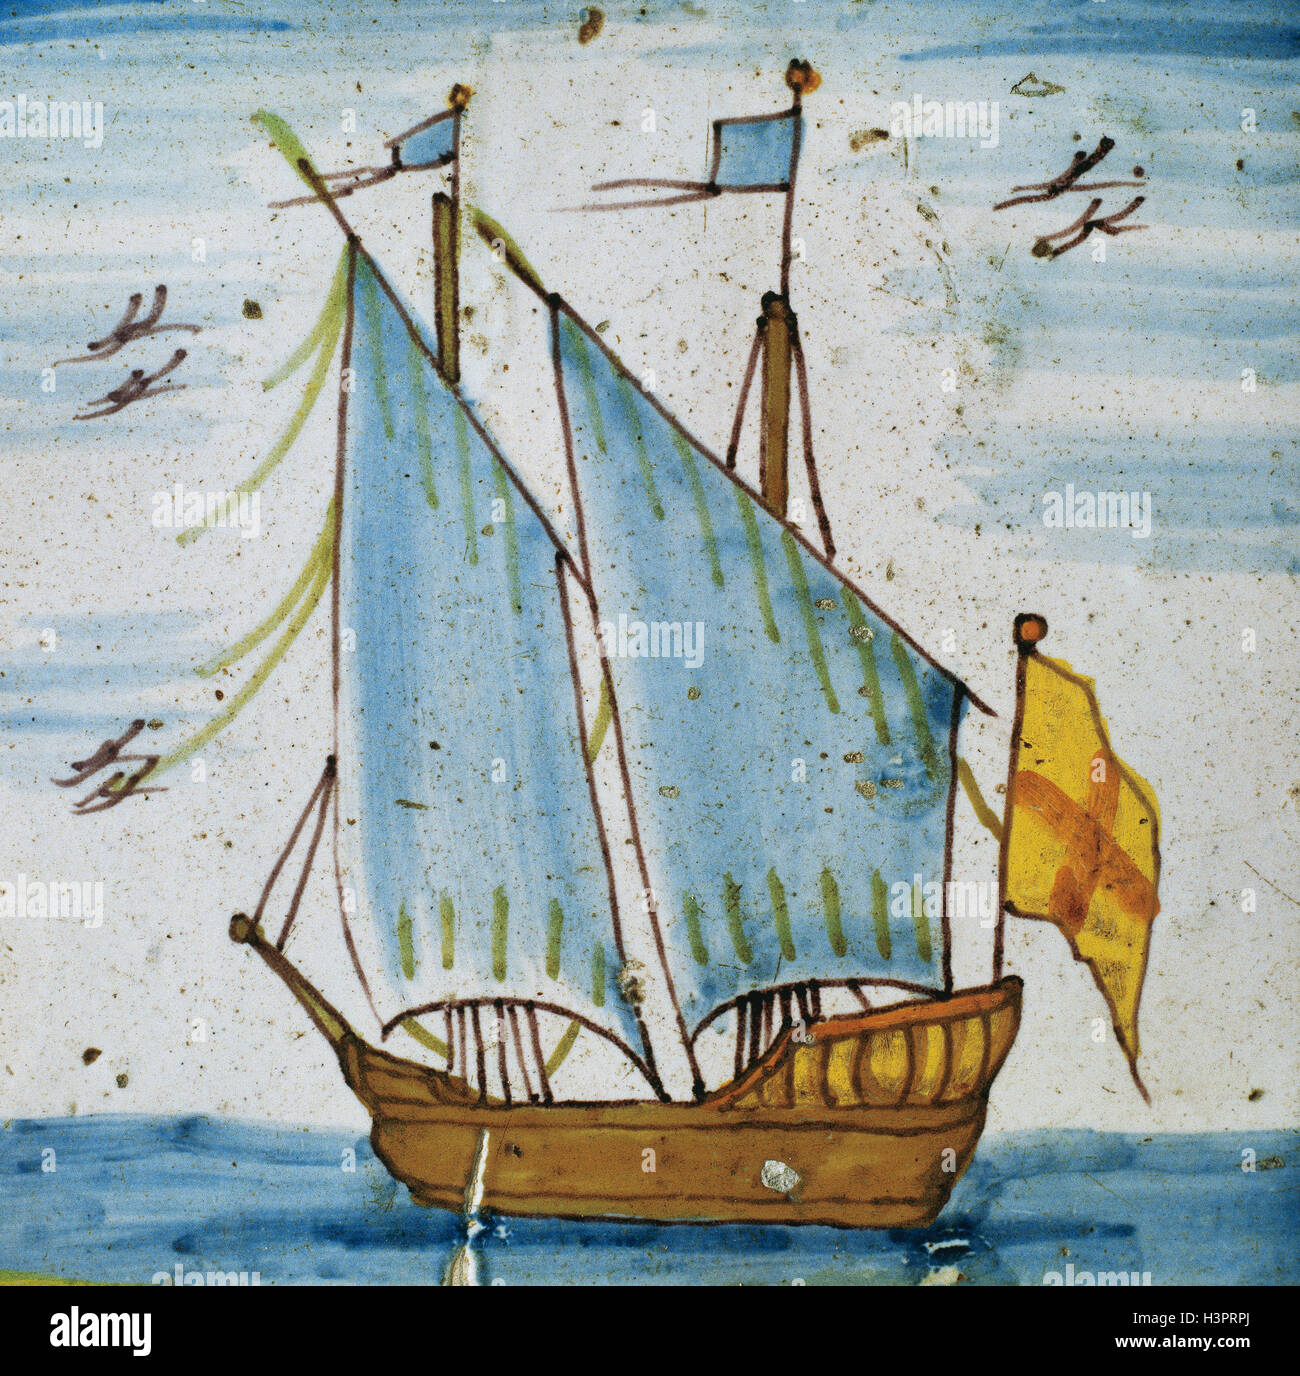 History of navigation. Tile depicting a two-masted sailboat with unfurled sails and flag at the stern. 18th century. Polychrome Catalan ceramic belonging to so-called Golden Age of Catalan and Barcelona pottery. Diocesan Museum of Barcelona. Spain. Stock Photo